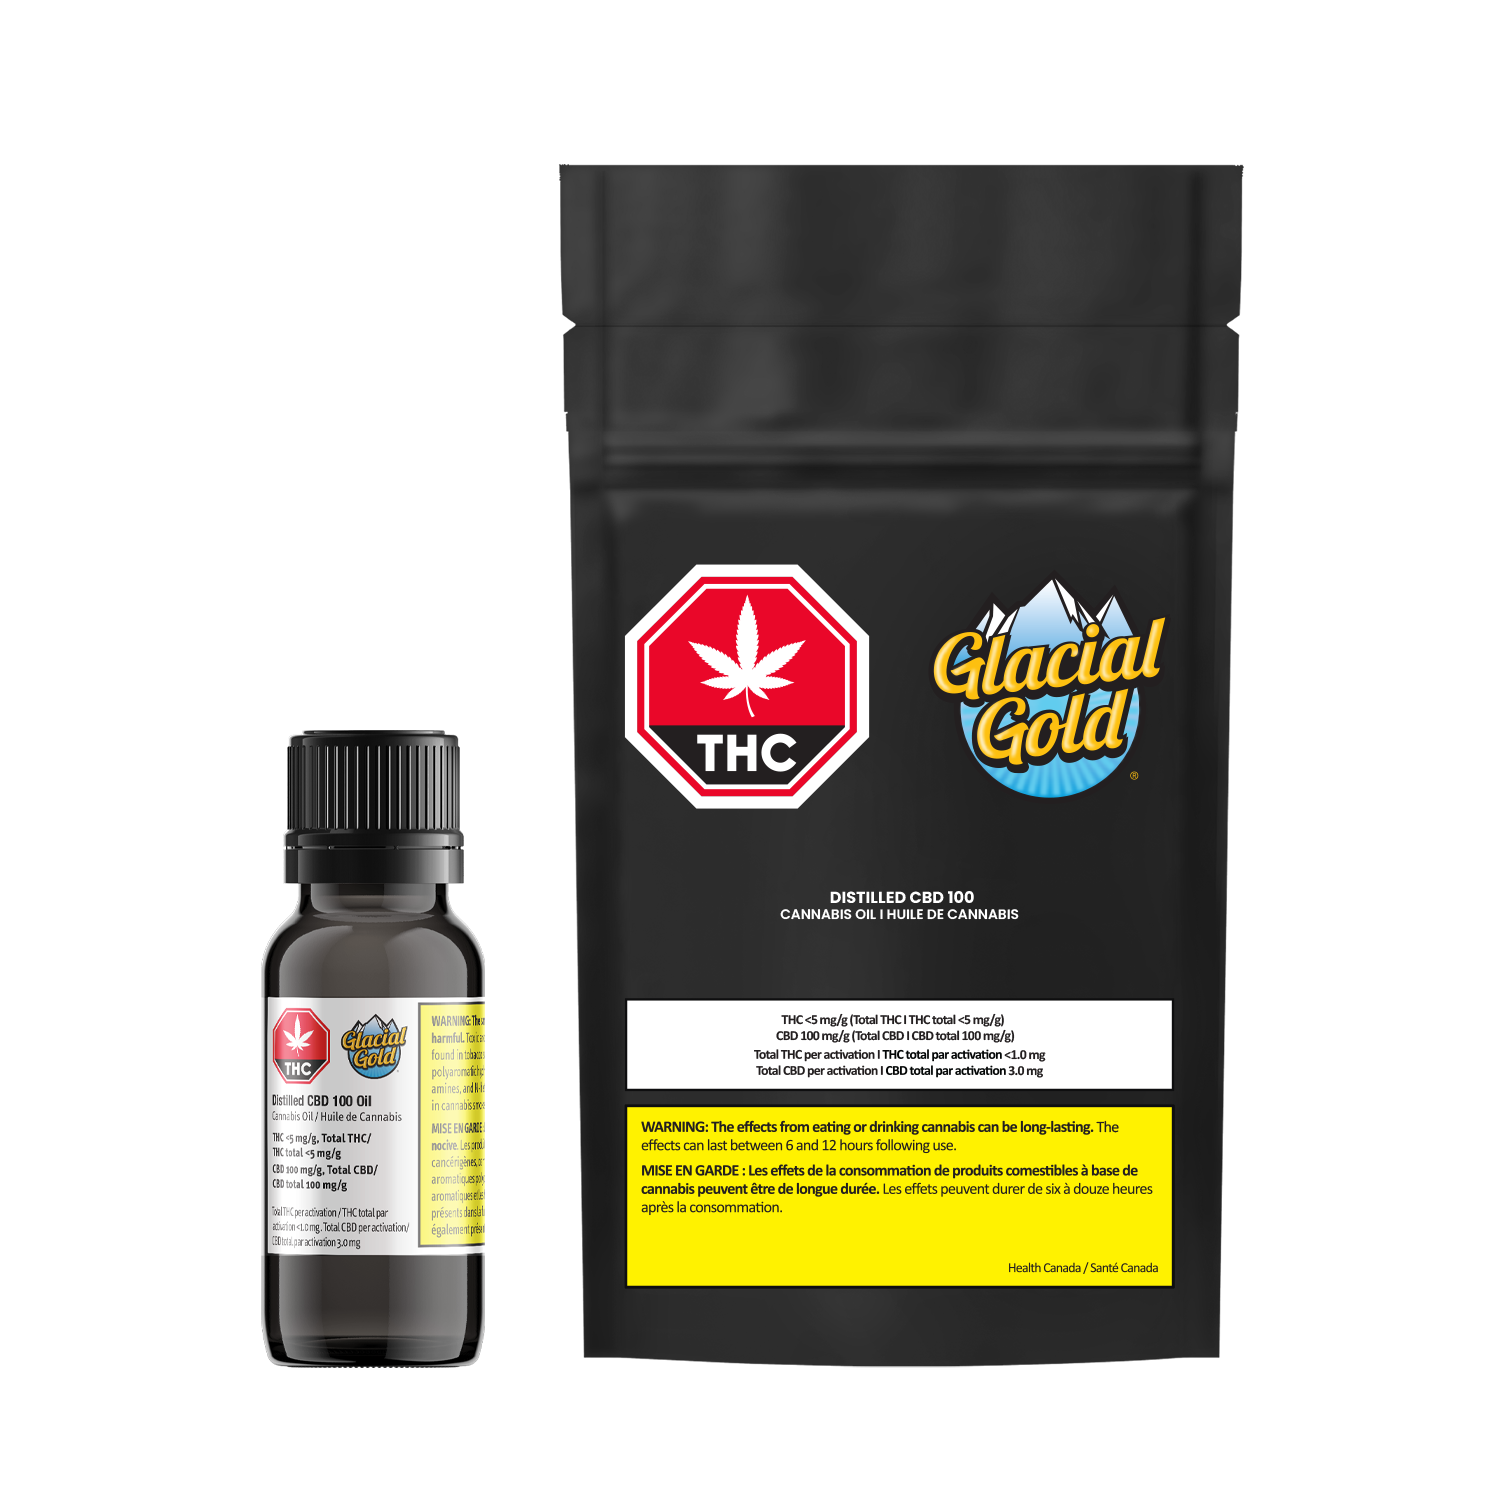 Cannabis Product Glacial Gold - Distilled CBD 100 Oil Drops by Glacial Gold - 1